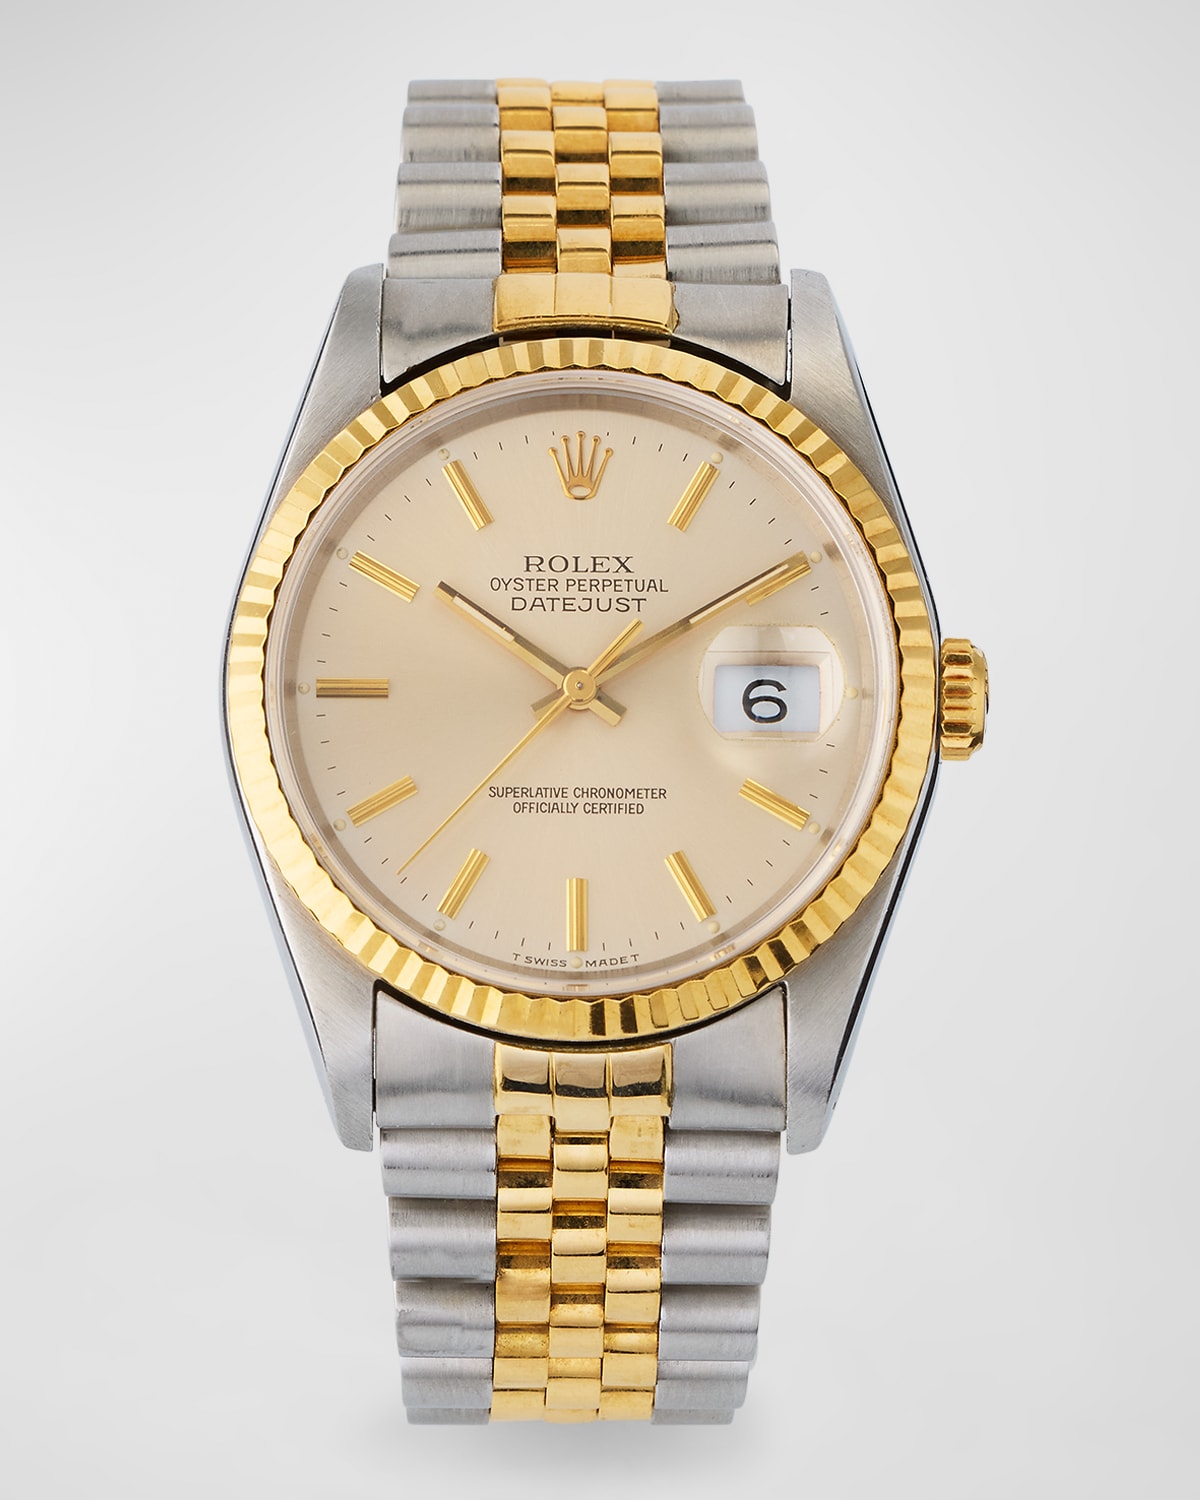 Rolex Oyster Perpetual Datejust 36mm Vintage 1990 Watch